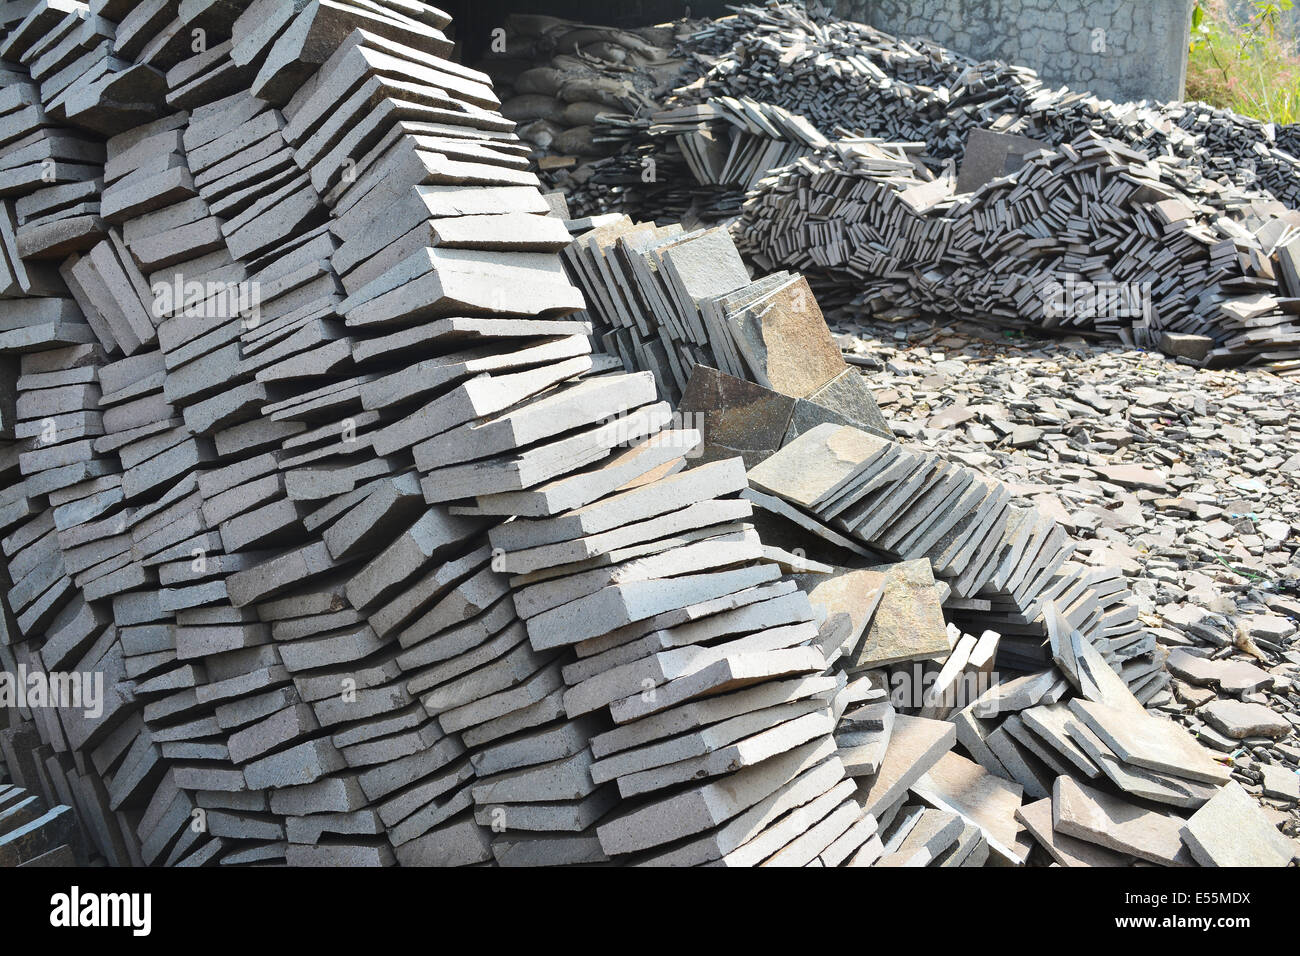 Stack of Shale stone for home decorating ready to sell. Stock Photo